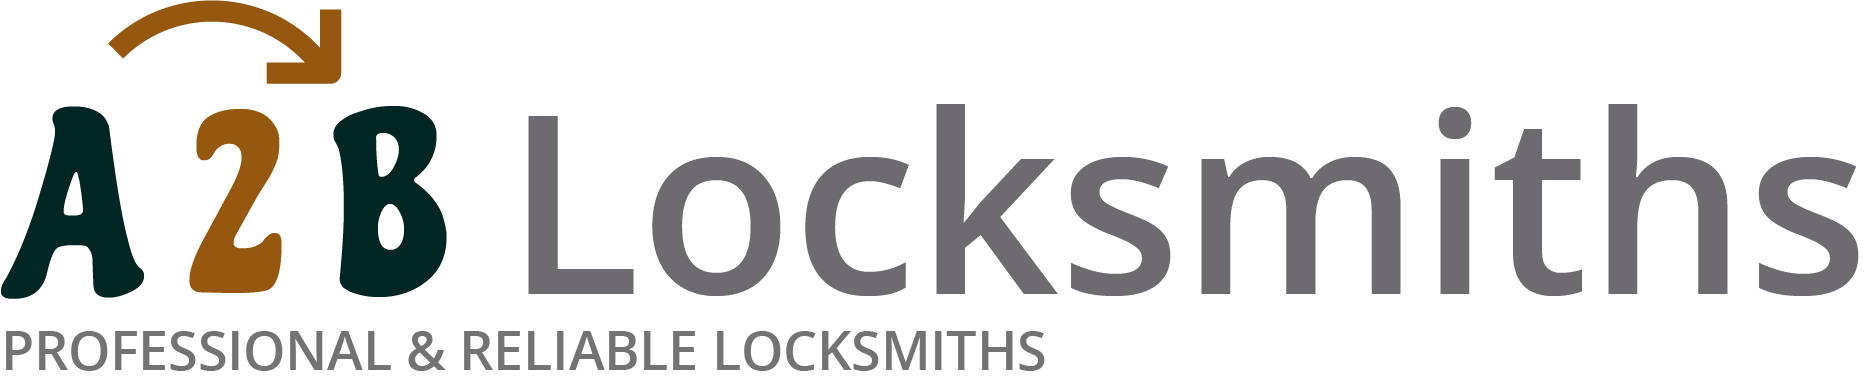 If you are locked out of house in Balham, our 24/7 local emergency locksmith services can help you.